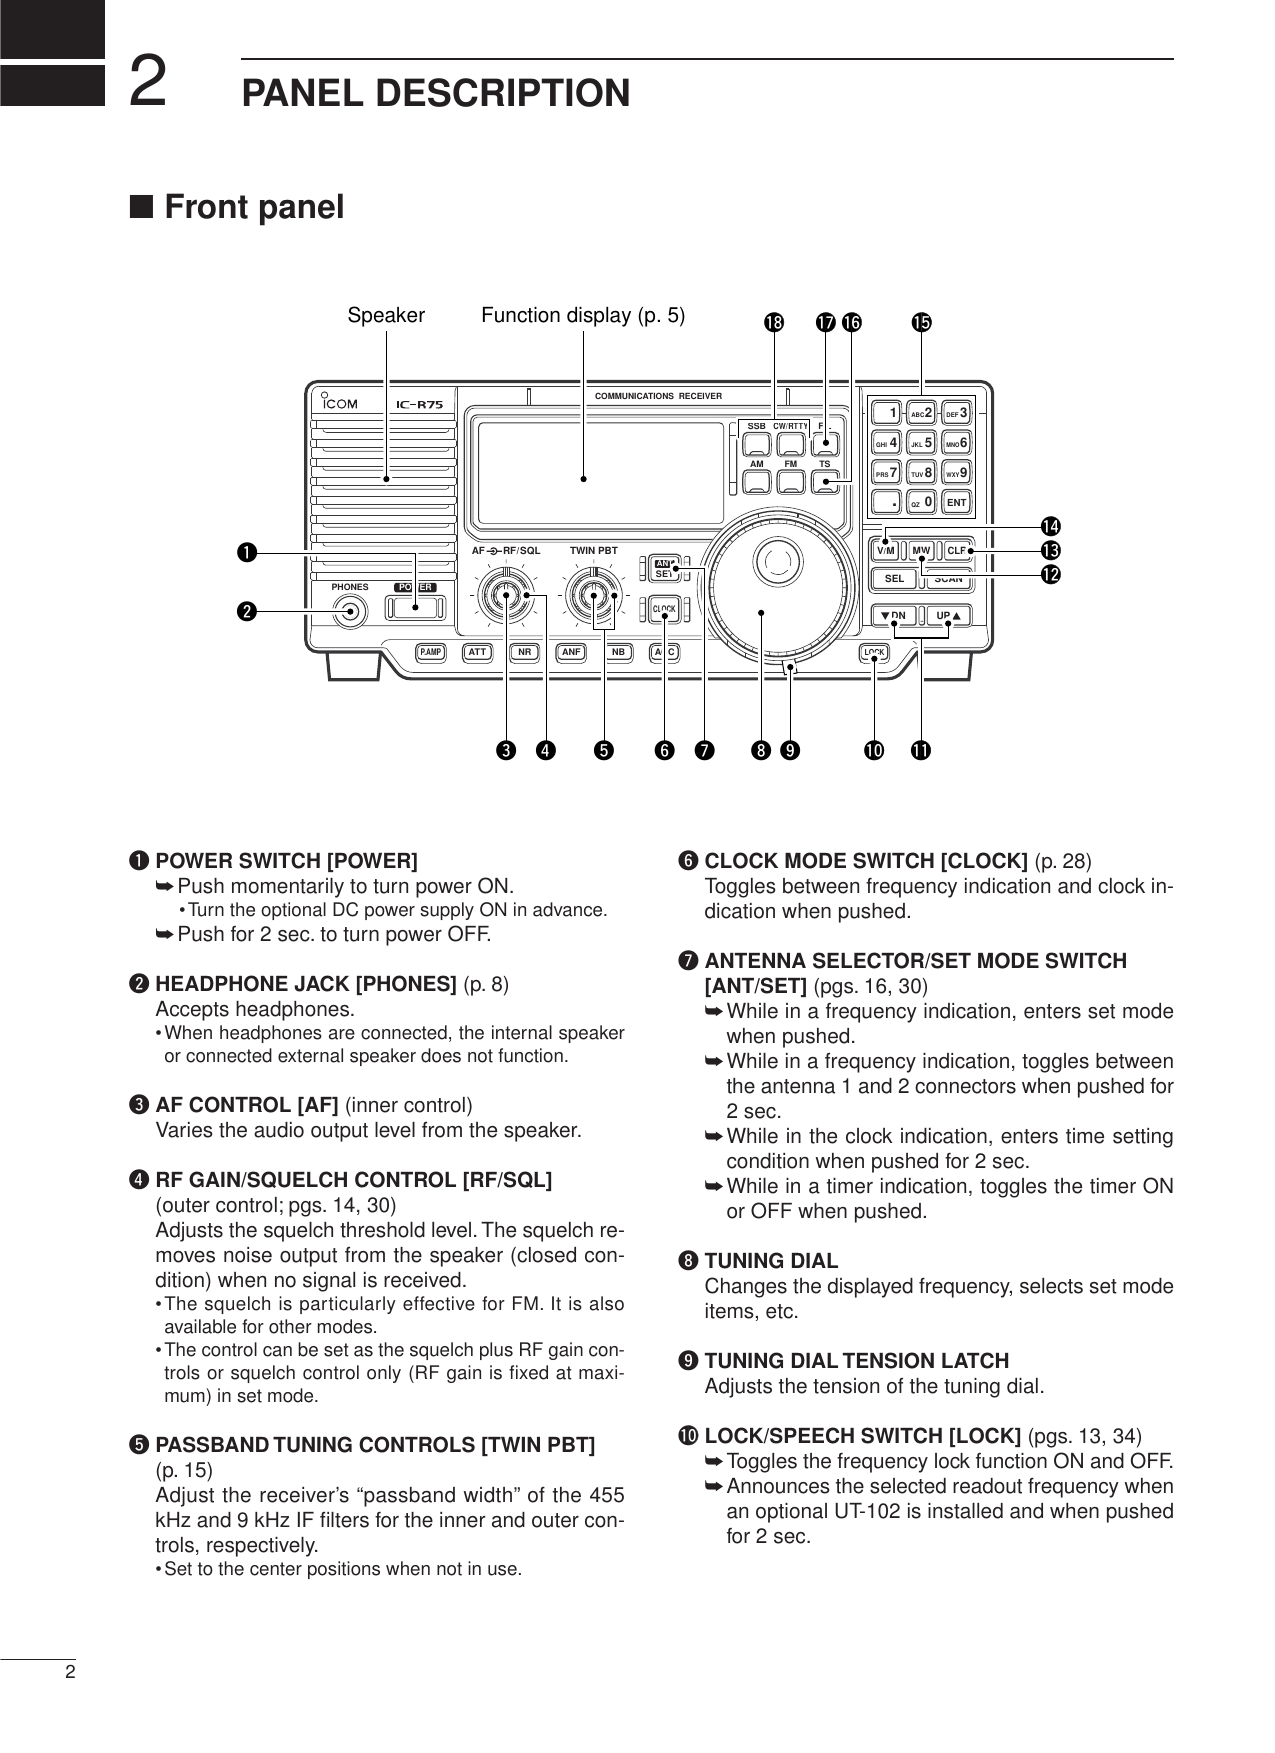 ■Front panelqPOWER SWITCH [POWER]➥Push momentarily to turn power ON.•Turn the optional DC power supply ON in advance.➥Push for 2 sec. to turn power OFF.wHEADPHONE JACK [PHONES] (p. 8)Accepts headphones.•When headphones are connected, the internal speakeror connected external speaker does not function.eAF CONTROL [AF] (inner control)Varies the audio output level from the speaker.rRF GAIN/SQUELCH CONTROL [RF/SQL](outer control; pgs. 14, 30)Adjusts the squelch threshold level.The squelch re-moves noise output from the speaker (closed con-dition) when no signal is received.•The squelch is particularly effective for FM. It is alsoavailable for other modes.•The control can be set as the squelch plus RF gain con-trols or squelch control only (RF gain is fixed at maxi-mum) in set mode.tPASSBAND TUNING CONTROLS [TWIN PBT](p. 15)Adjust the receiver’s “passband width” of the 455kHz and 9 kHz IF ﬁlters for the inner and outer con-trols, respectively.•Set to the center positions when not in use.yCLOCK MODE SWITCH [CLOCK] (p. 28)Toggles between frequency indication and clock in-dication when pushed.uANTENNA SELECTOR/SET MODE SWITCH[ANT/SET] (pgs. 16, 30)➥While in a frequency indication, enters set modewhen pushed.➥While in a frequency indication, toggles betweenthe antenna 1 and 2 connectors when pushed for2 sec.➥While in the clock indication, enters time settingcondition when pushed for 2 sec.➥While in a timer indication, toggles the timer ONor OFF when pushed.iTUNING DIALChanges the displayed frequency, selects set modeitems, etc.oTUNING DIAL TENSION LATCHAdjusts the tension of the tuning dial.!0 LOCK/SPEECH SWITCH [LOCK] (pgs. 13, 34)➥Toggles the frequency lock function ON and OFF.➥Announces the selected readout frequency whenan optional UT-102 is installed and when pushedfor 2 sec.22PANEL DESCRIPTIONFILTSCW/RTTYFMSSBAMPHONES POWERRF/SQL TWIN PBTAFCOMMUNICATIONS  RECEIVERDN UP12ABC3DEF4GHI5JKL6MNO7PRS8TUV9WXY.0QZENTV/M MWSEL SCANCLRLOCKAGCNBANFNRATTP.AMPSETCLOCKANTFunction display (p. 5)Speakerqwe r t y i o !0 !1!3!4!5!6!7!8!2u